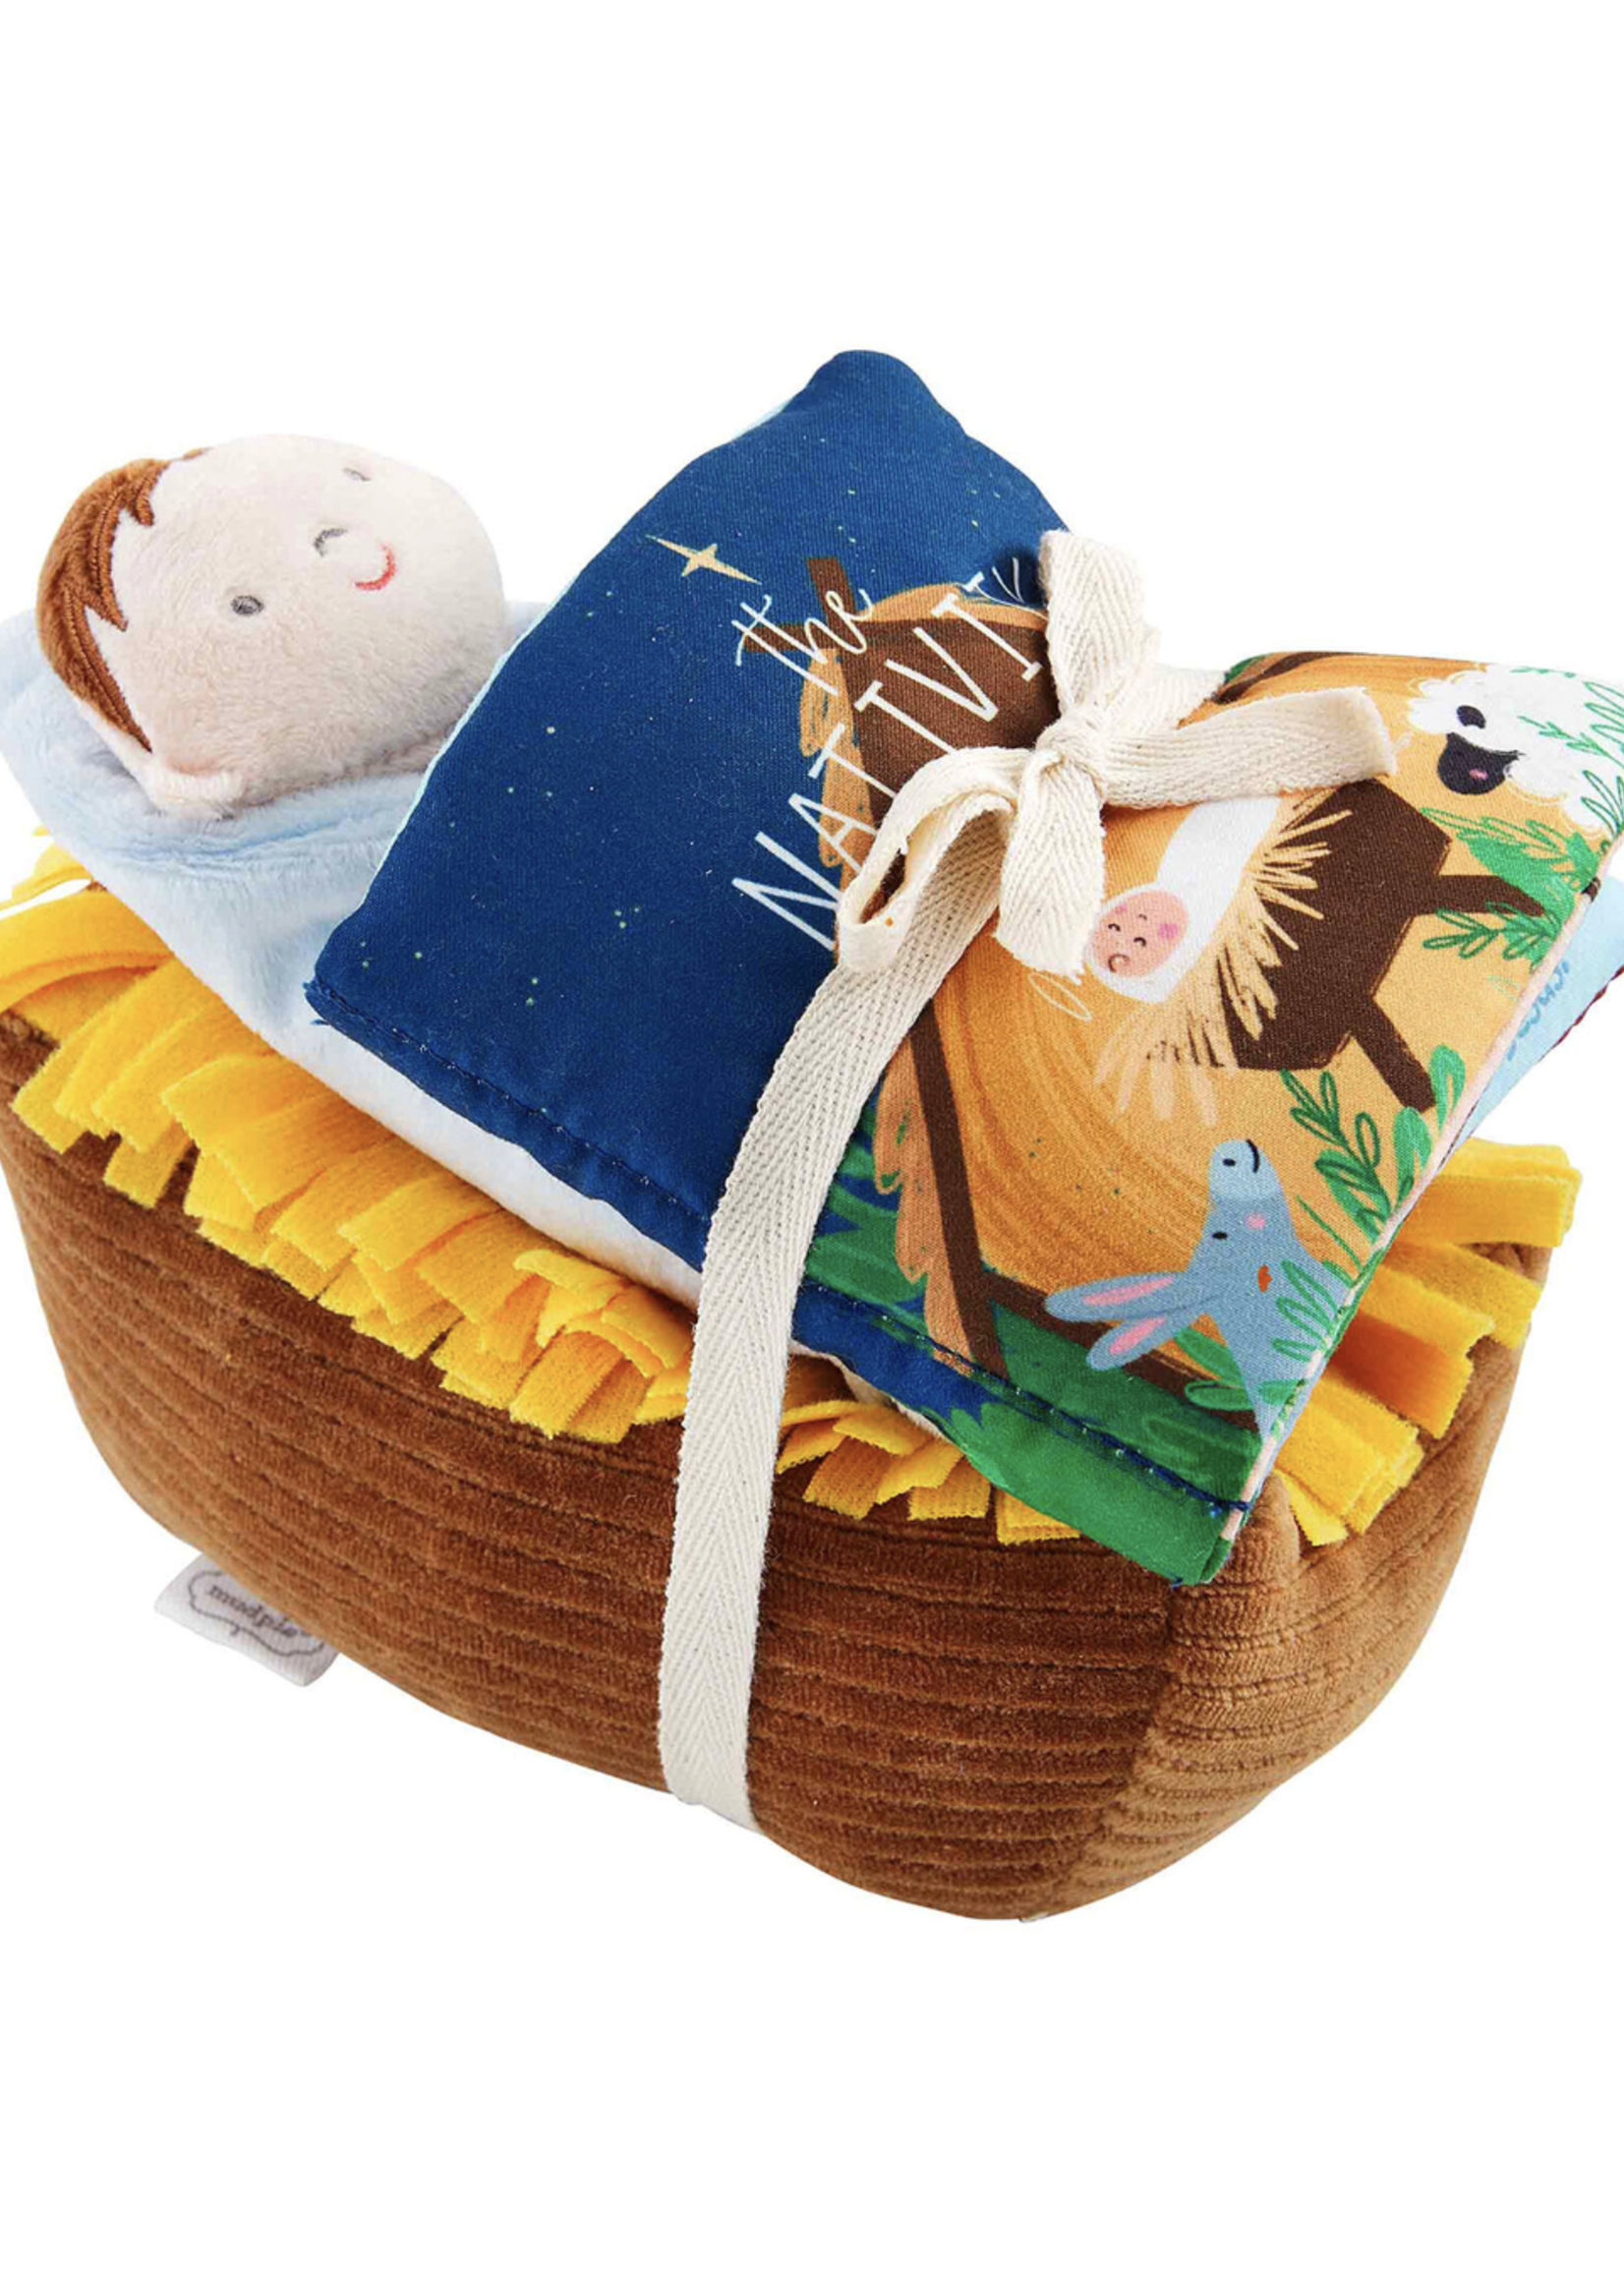 Elitaire Petite Nativity Plush Toy with Book